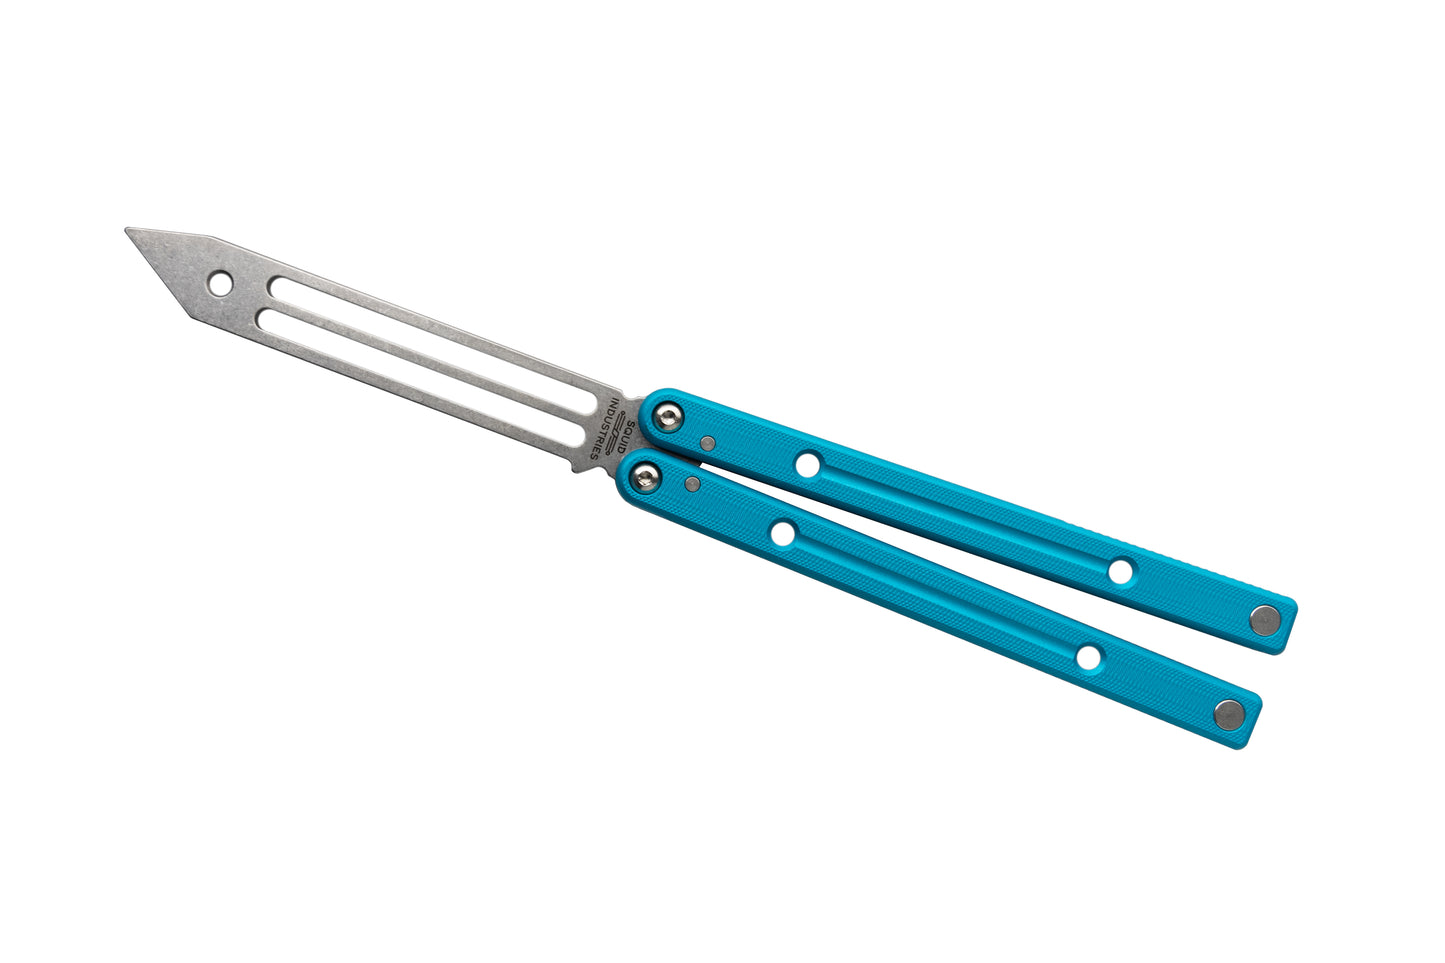 Teal Clearance Blemished Squidtrainer V4 Balisong Butterfly Knife Trainer 